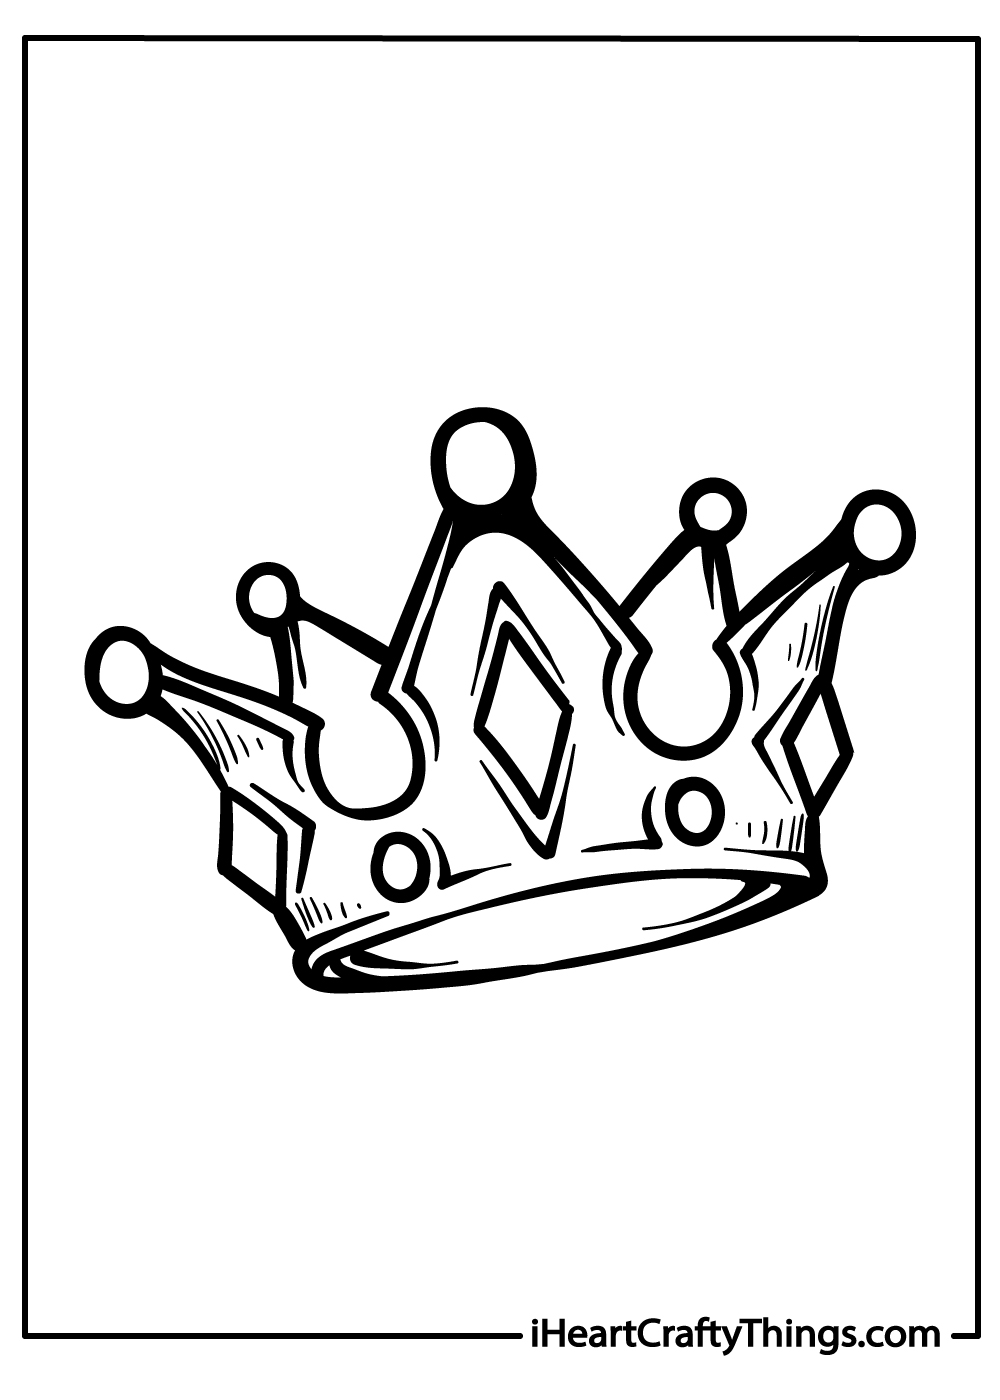 Prince King Paper Crowns Printable Royal Coloring Costume Craft Activity